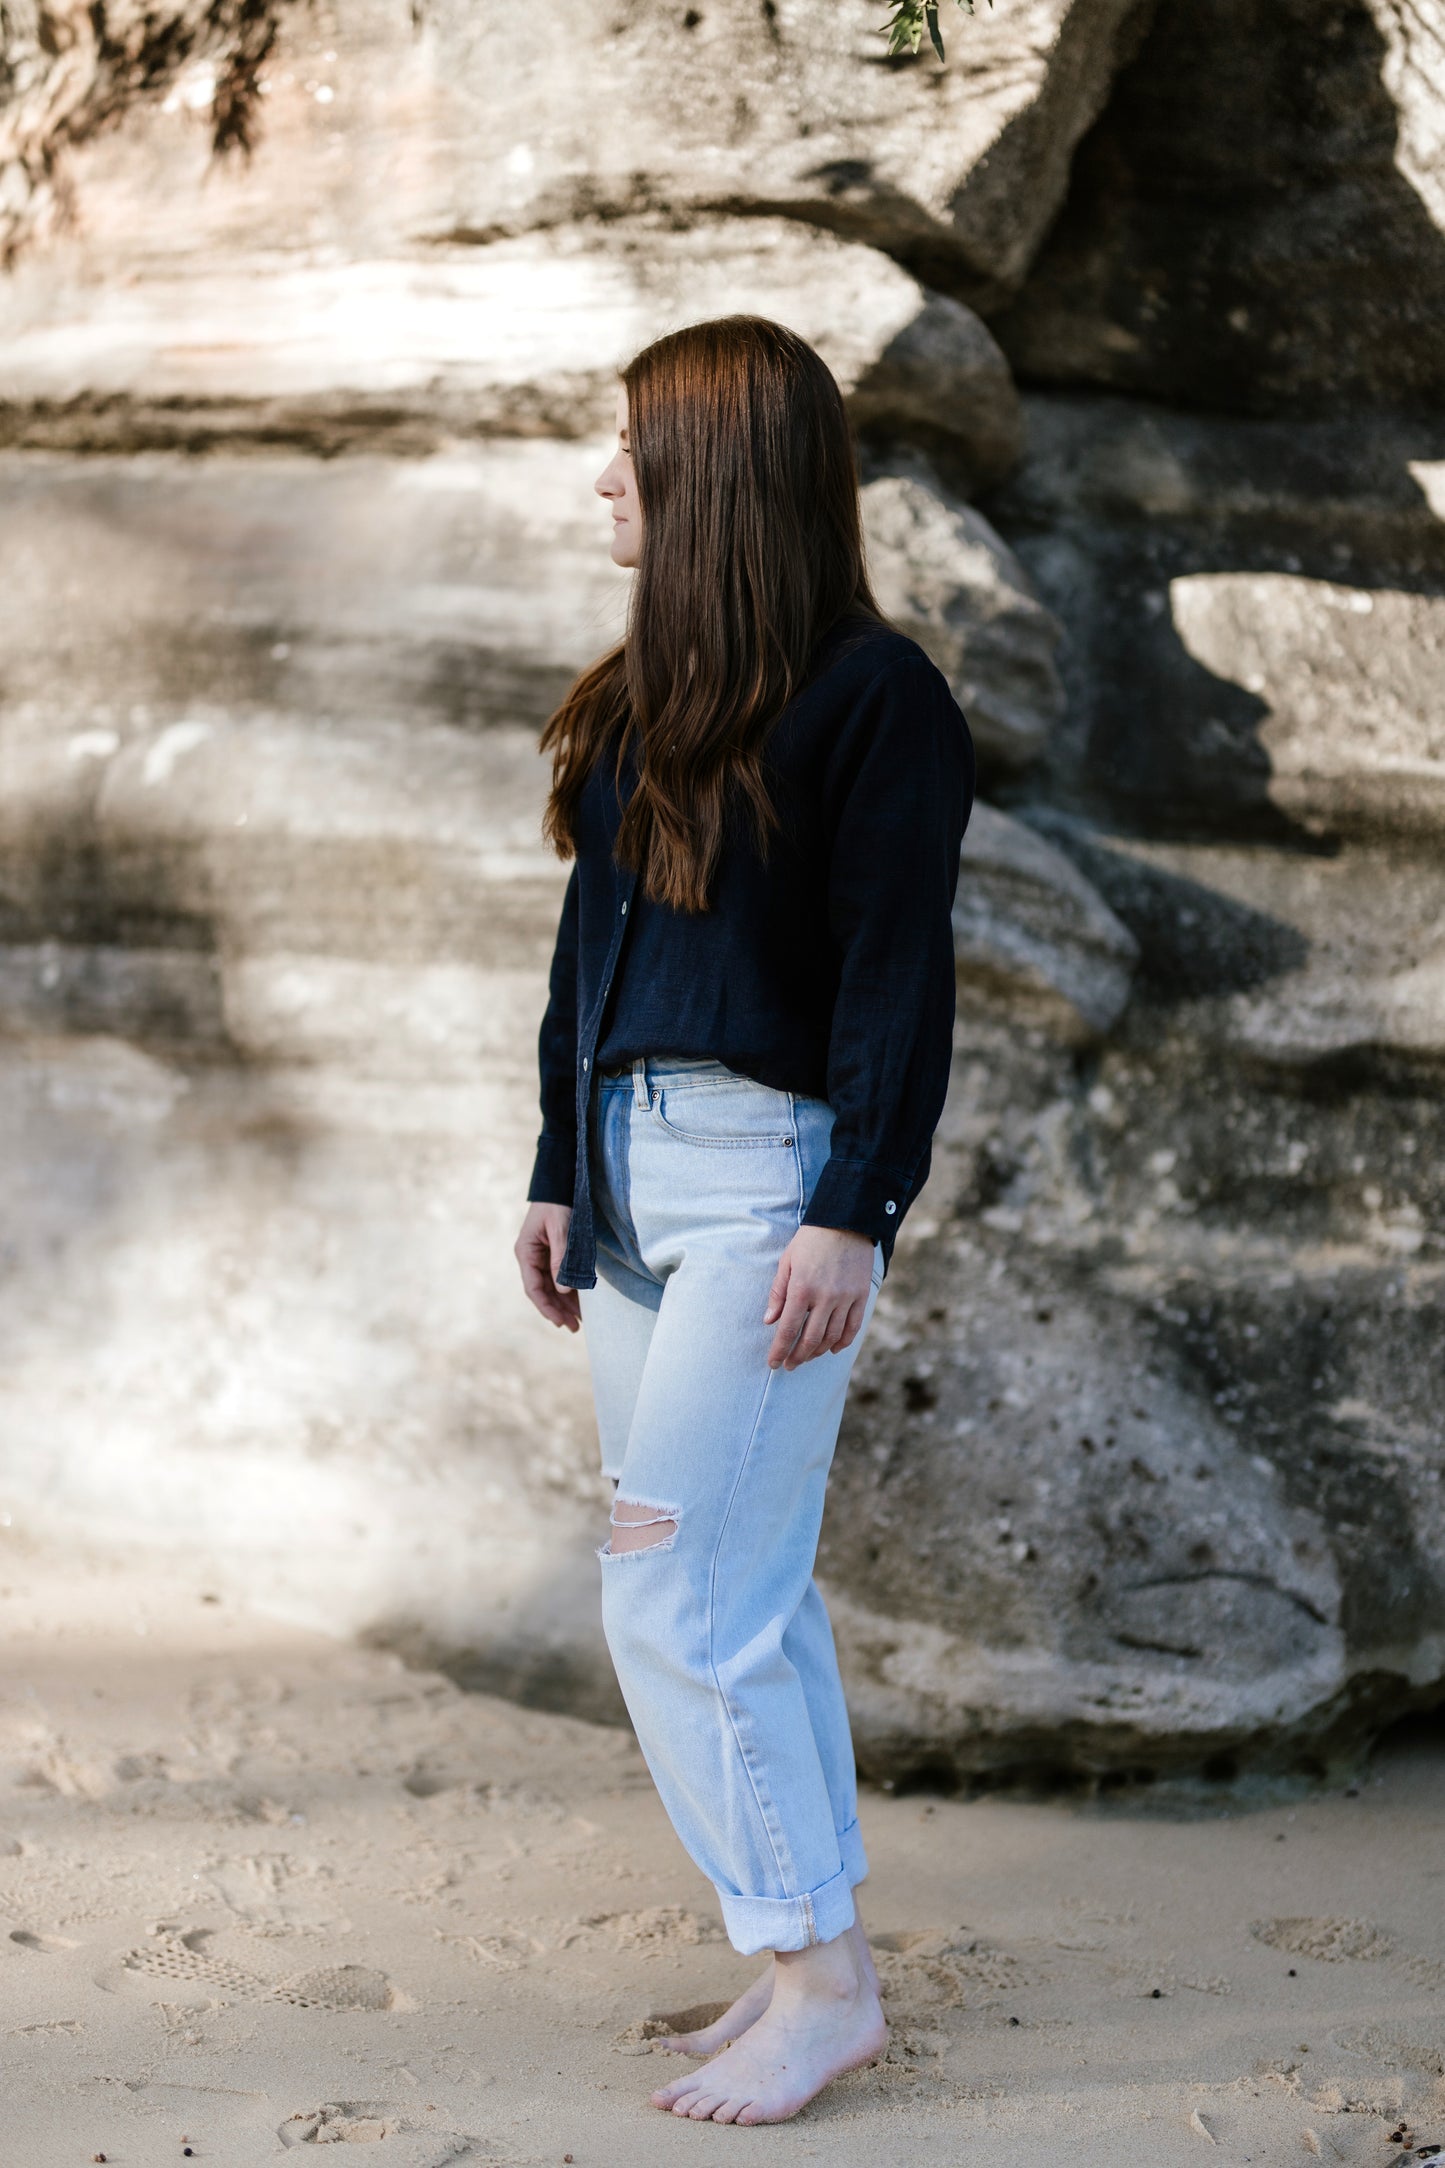 A short, petite woman standing side on in a linen shirt and jeans.